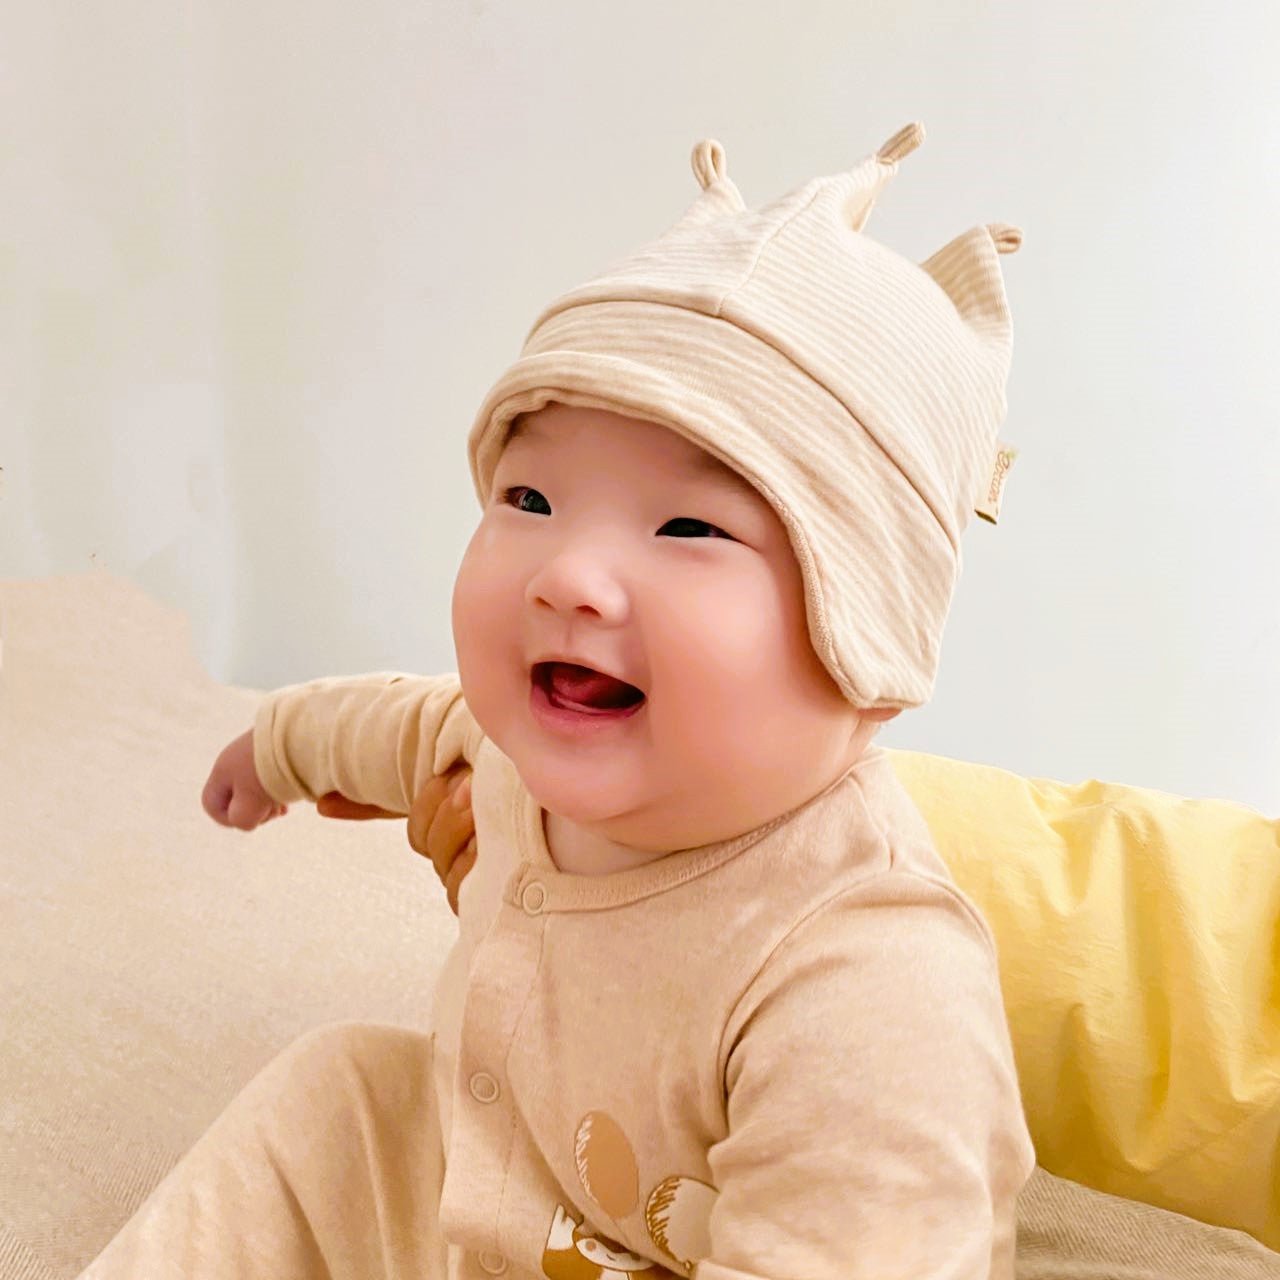 Organic Cotton Toddler Hat: Cutes Newborn Hats with Top Knots